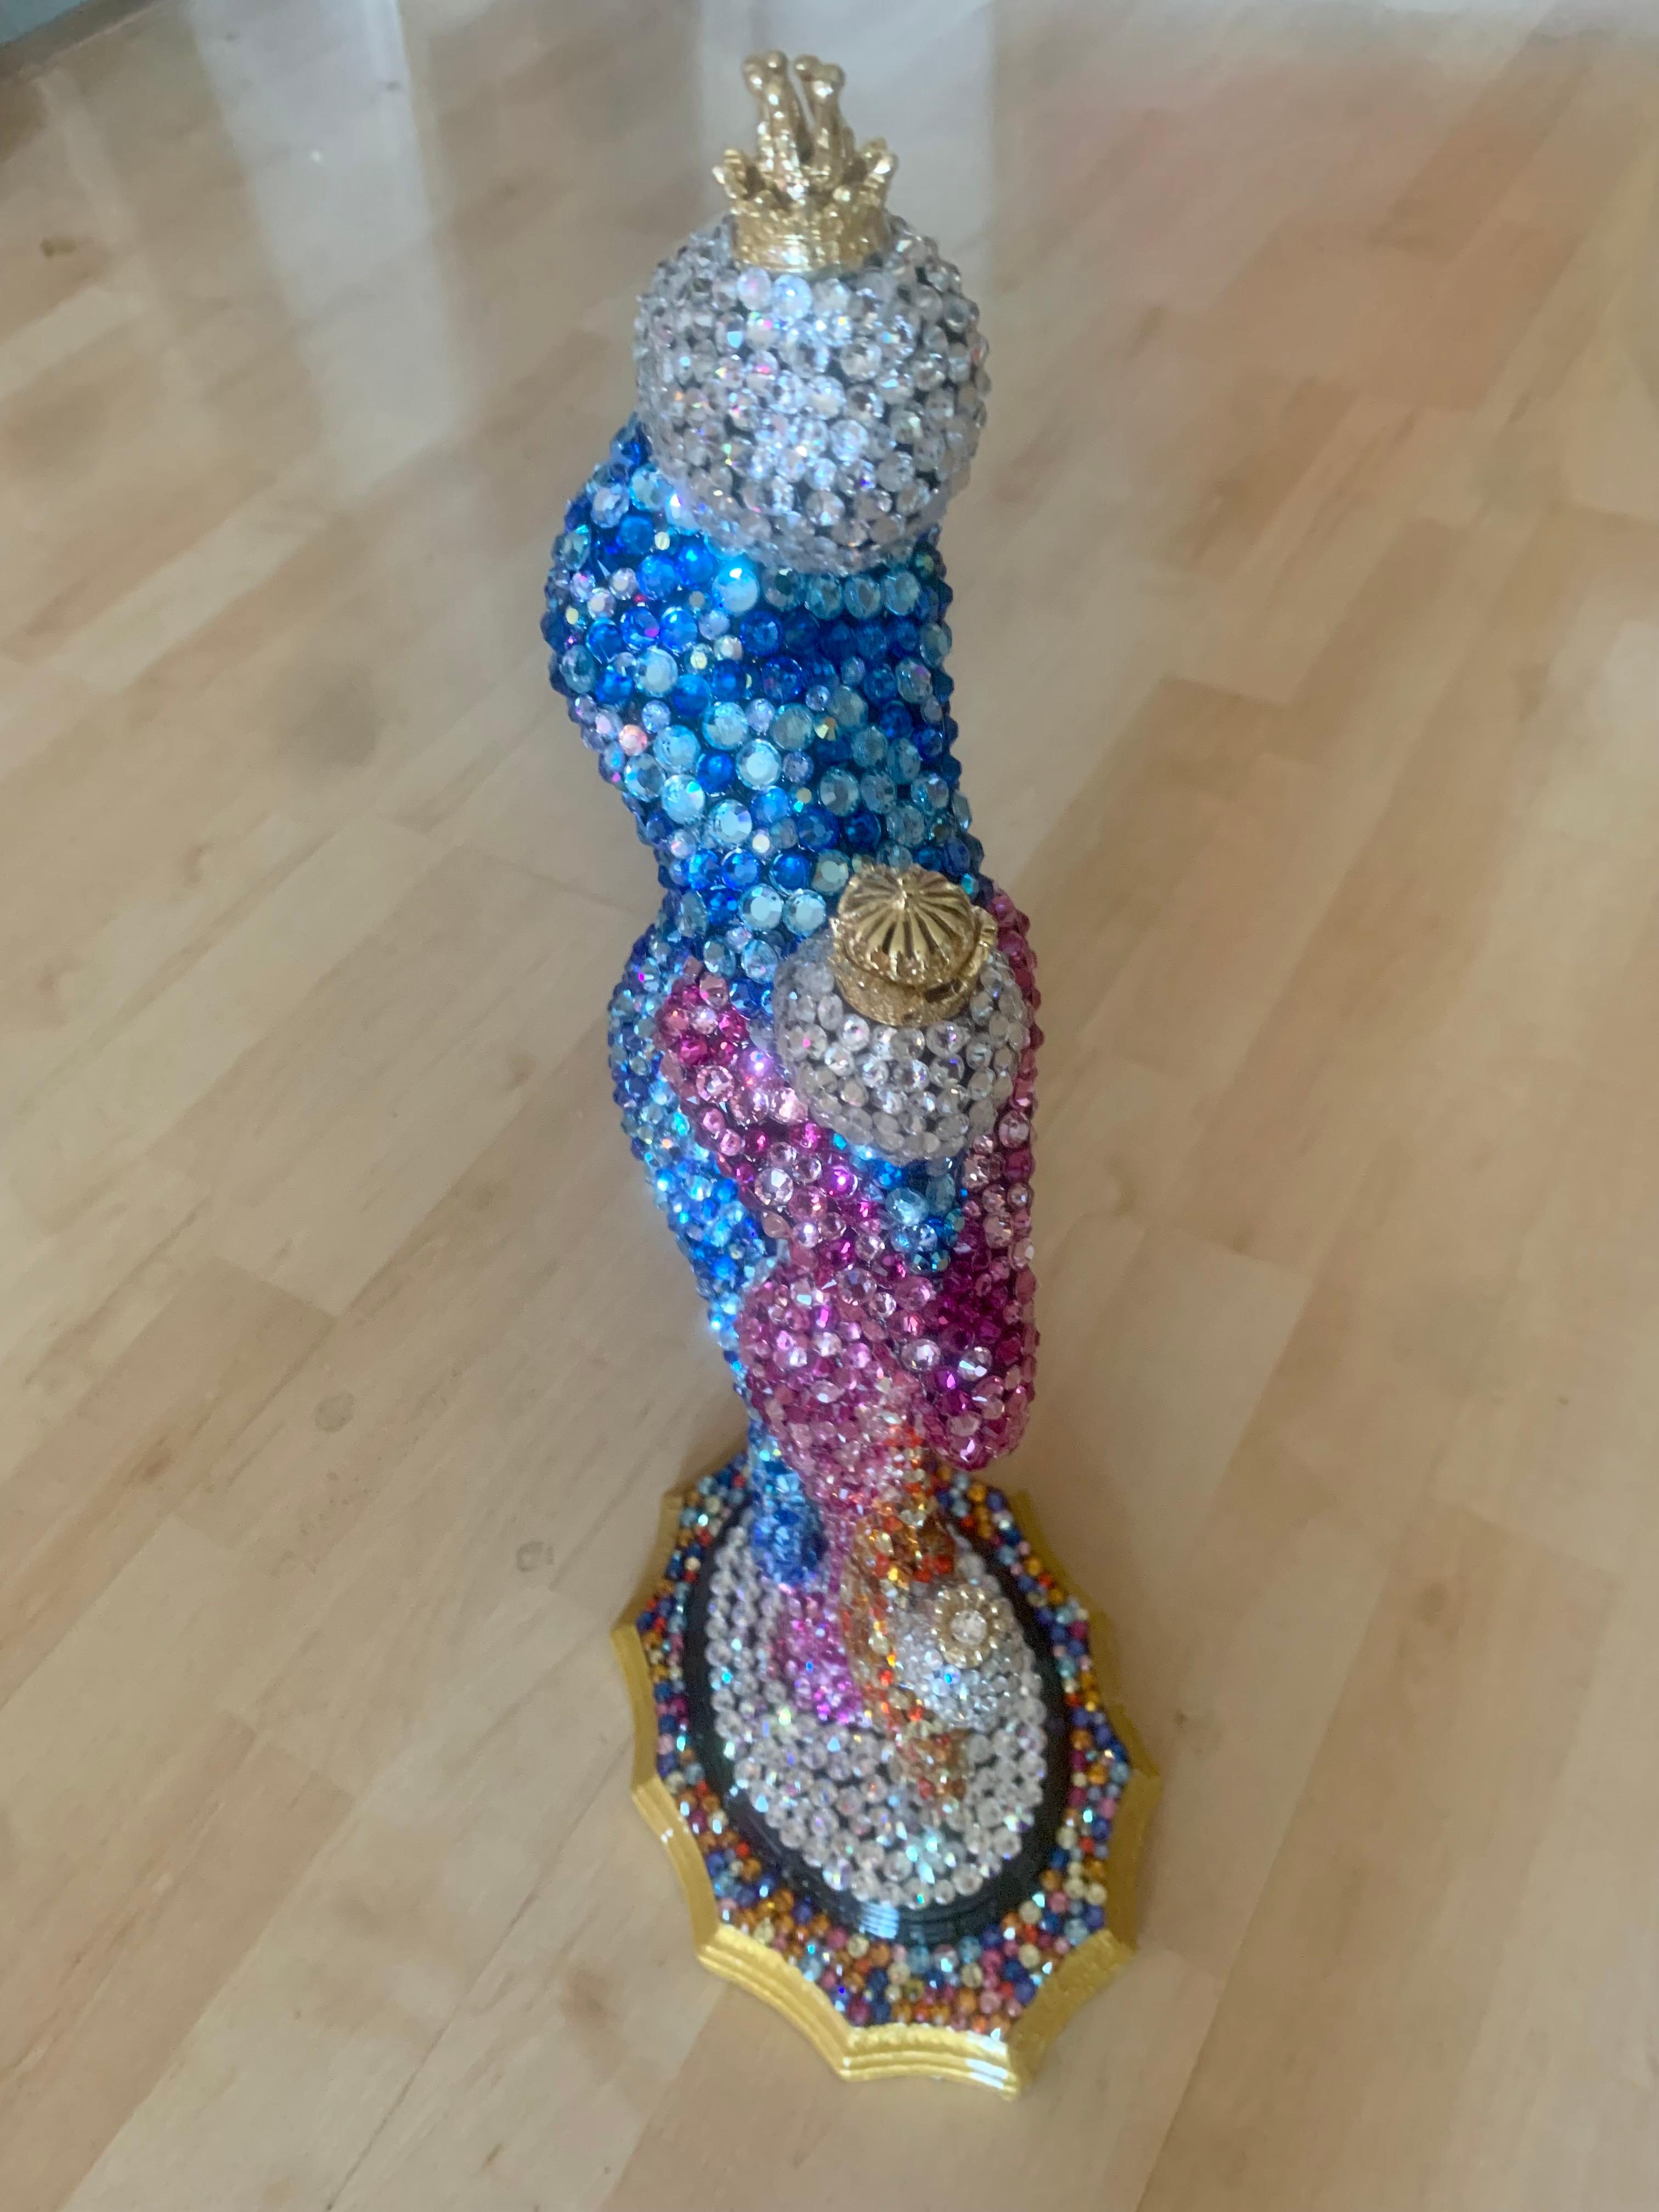 THE ROYAL FAMILY (1 Of a Kind Sculpture W/ Genuine Swarovski Crystals) 12